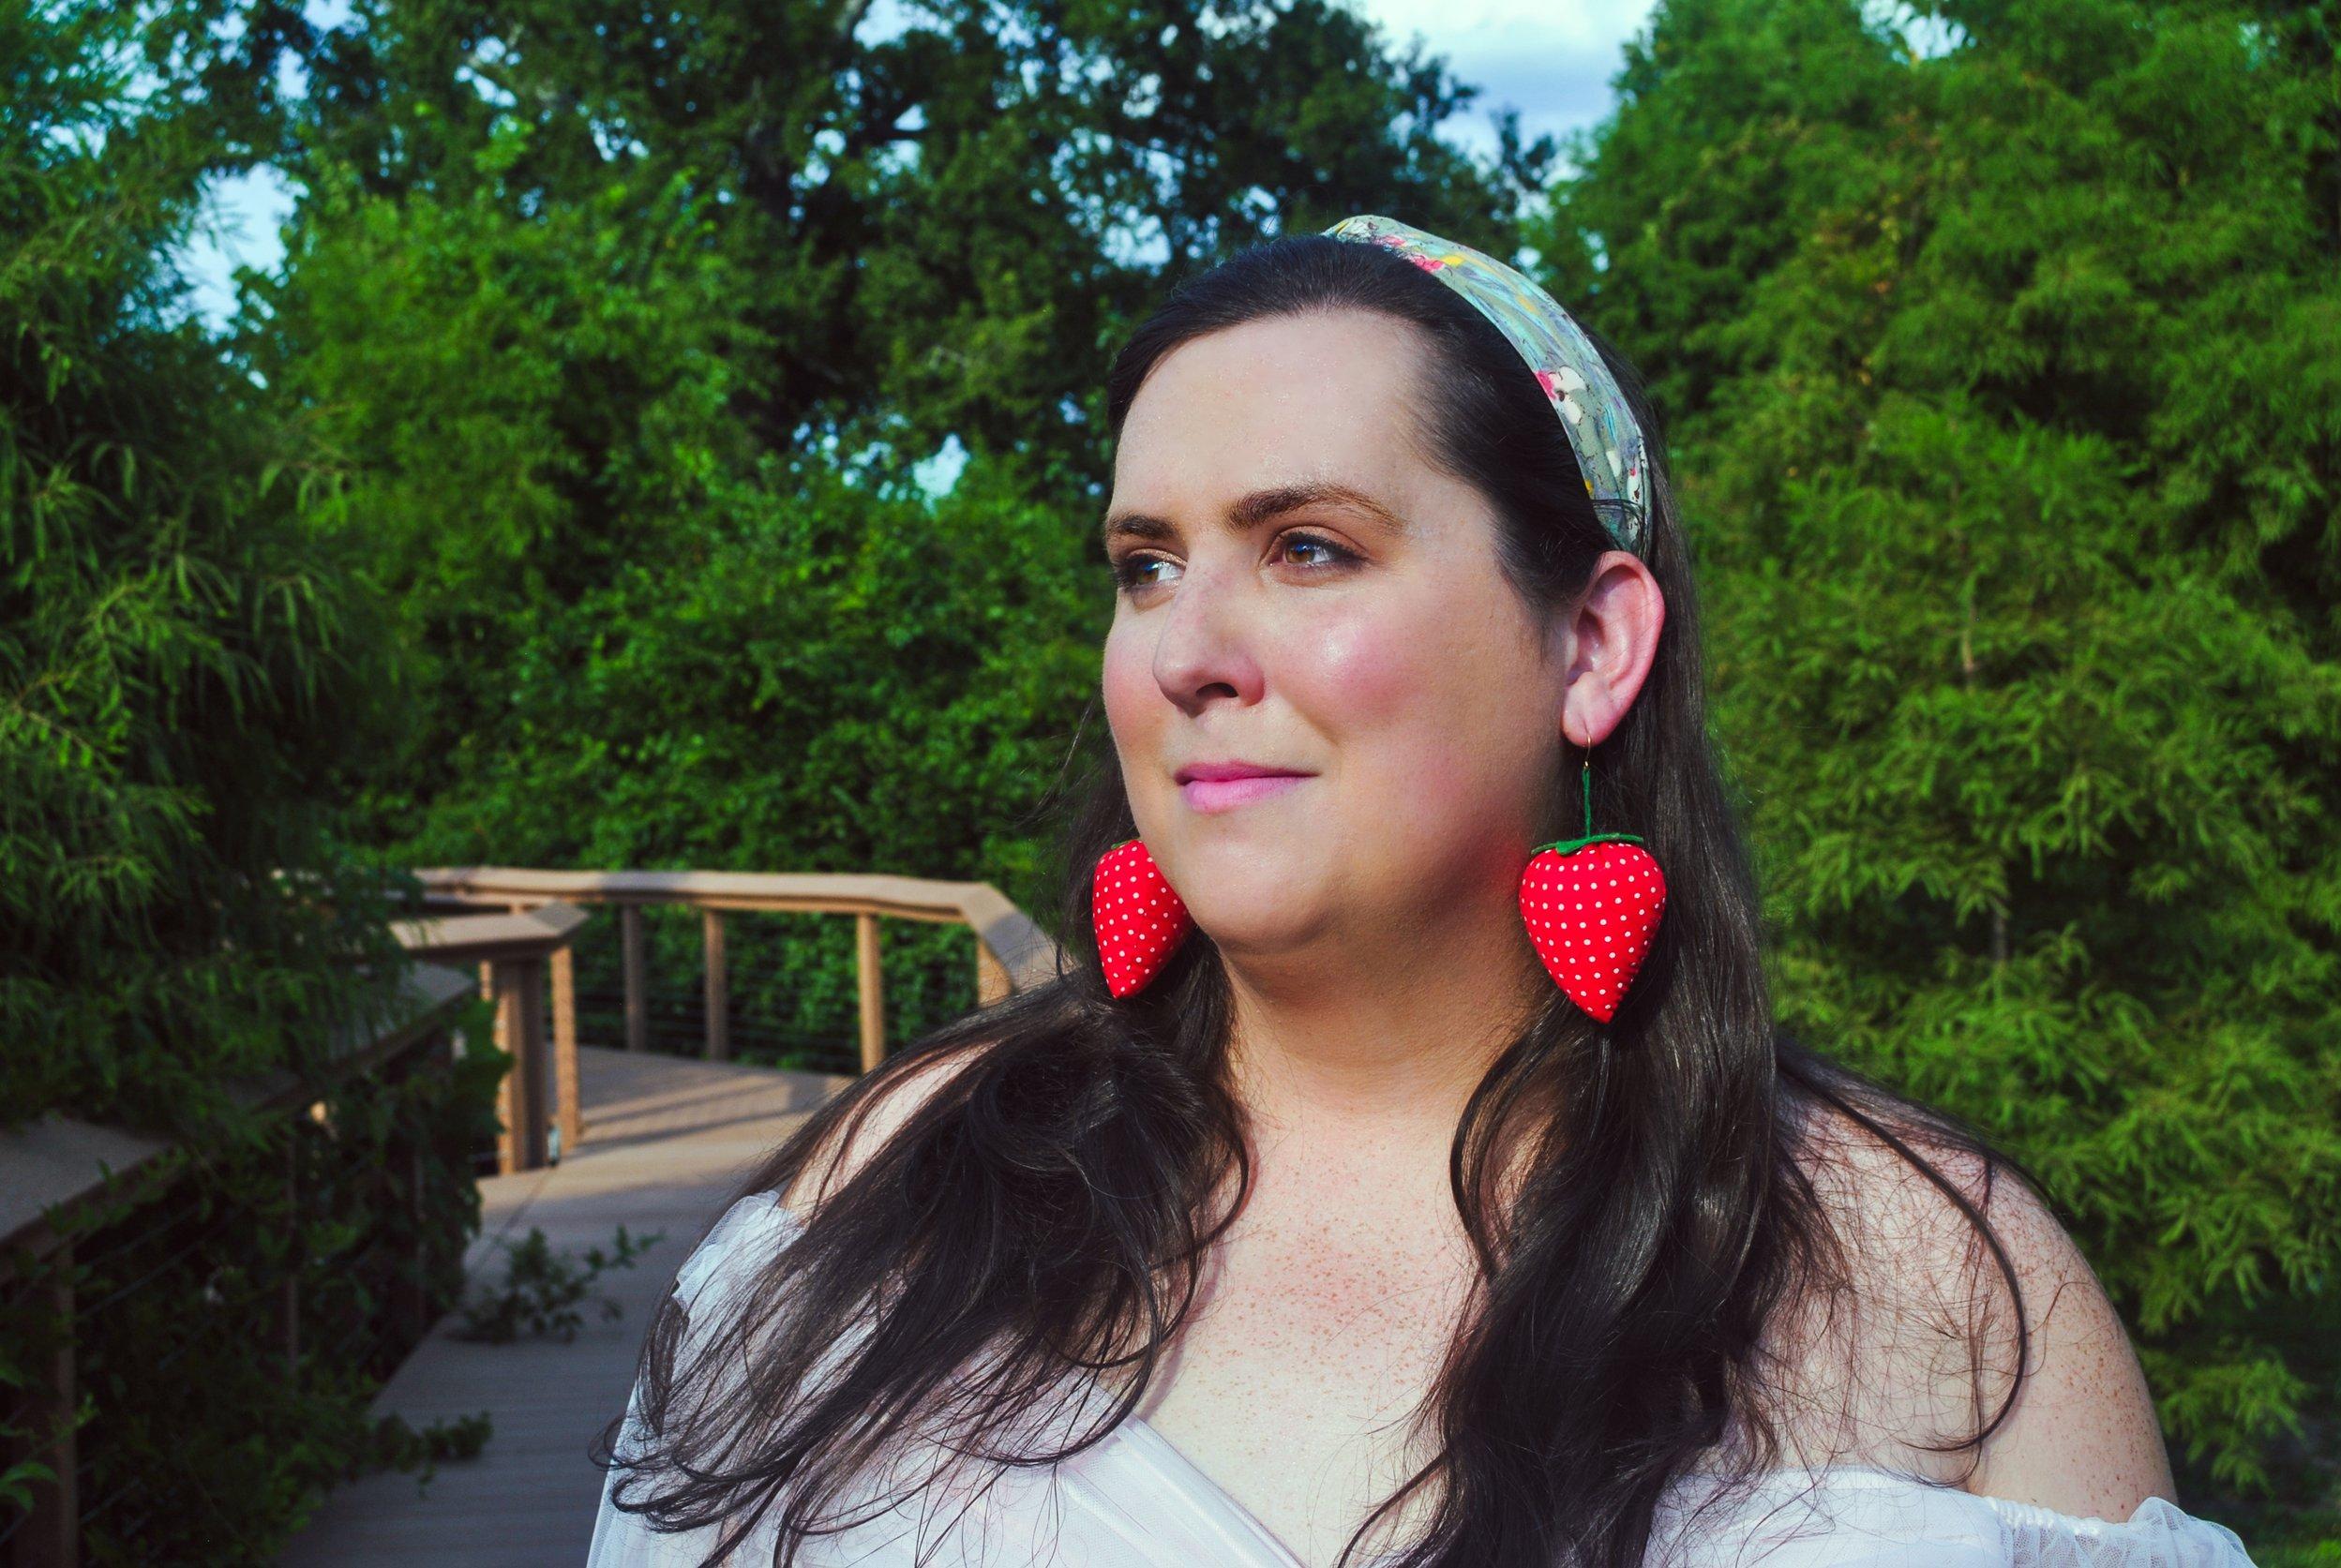 Evelyn Berry outside on a spring day wearing giant strawberry earrings